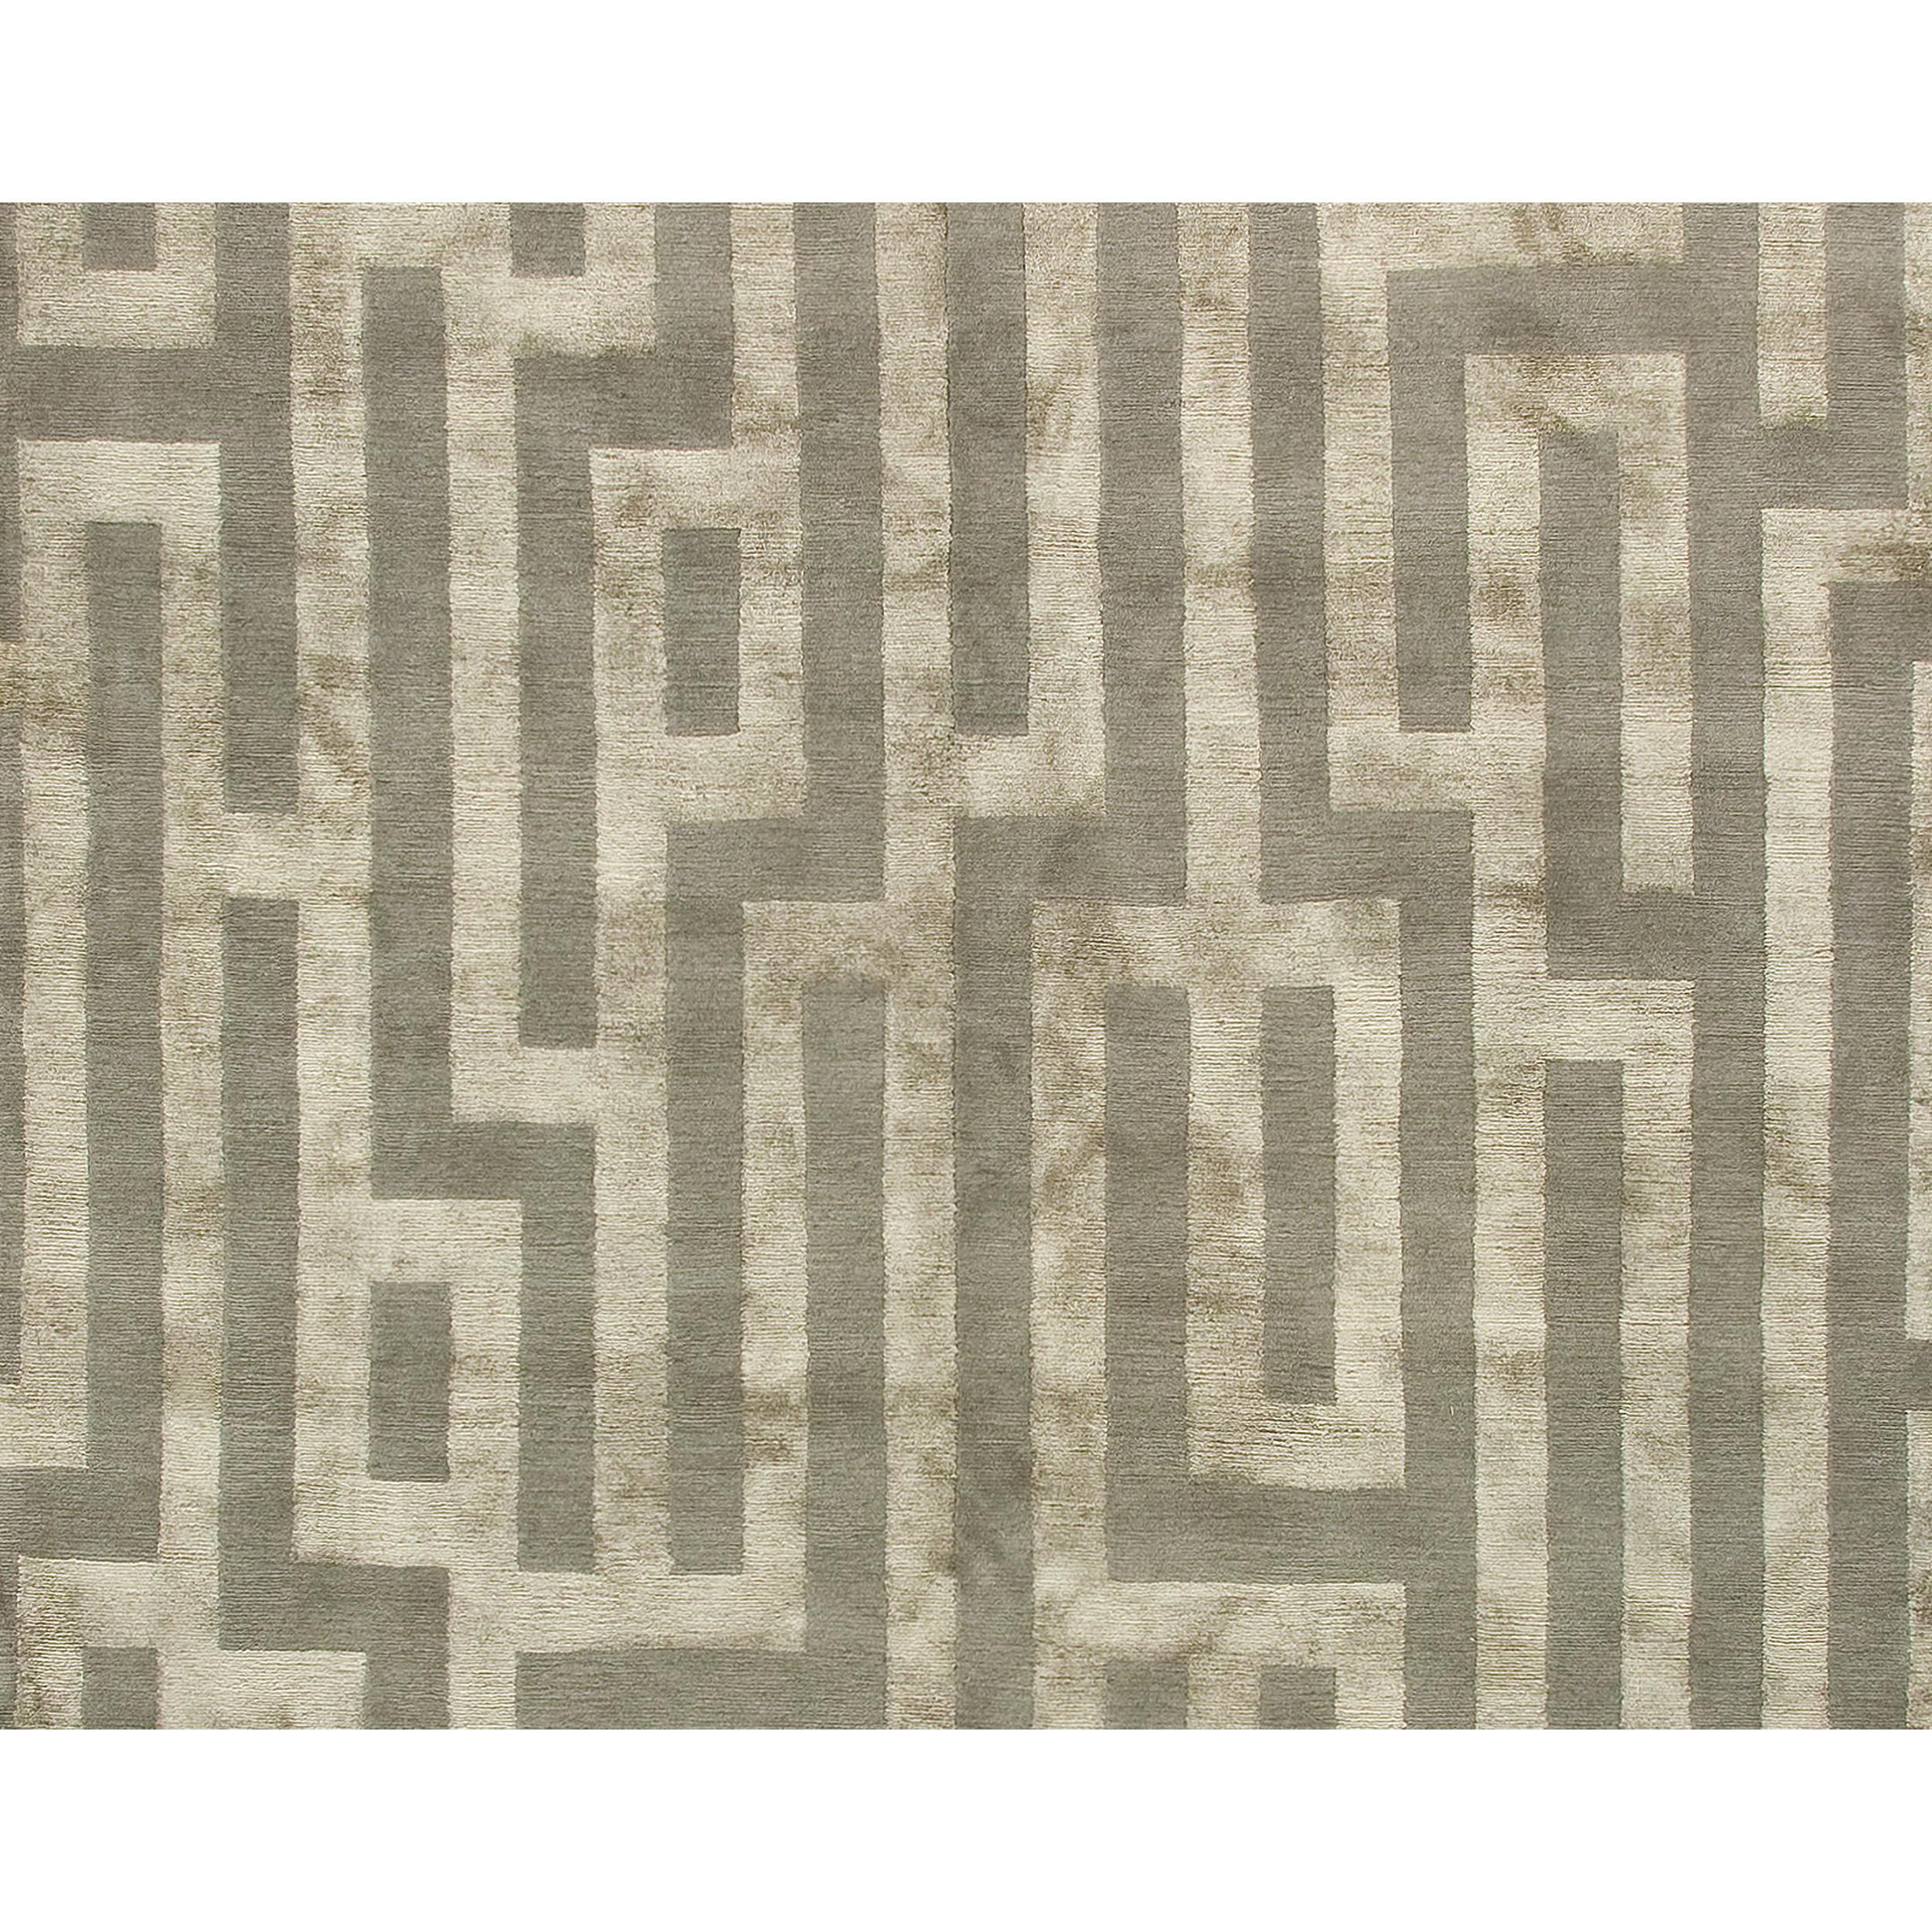 This luxurious modern rug was meticulously hand-knotted in Nepal. Crafted from a harmonious combination of silk and sumptuous wool, its softness, durability, and natural warmth make it an ideal partner to silk, adding a touch of sheer elegance. This